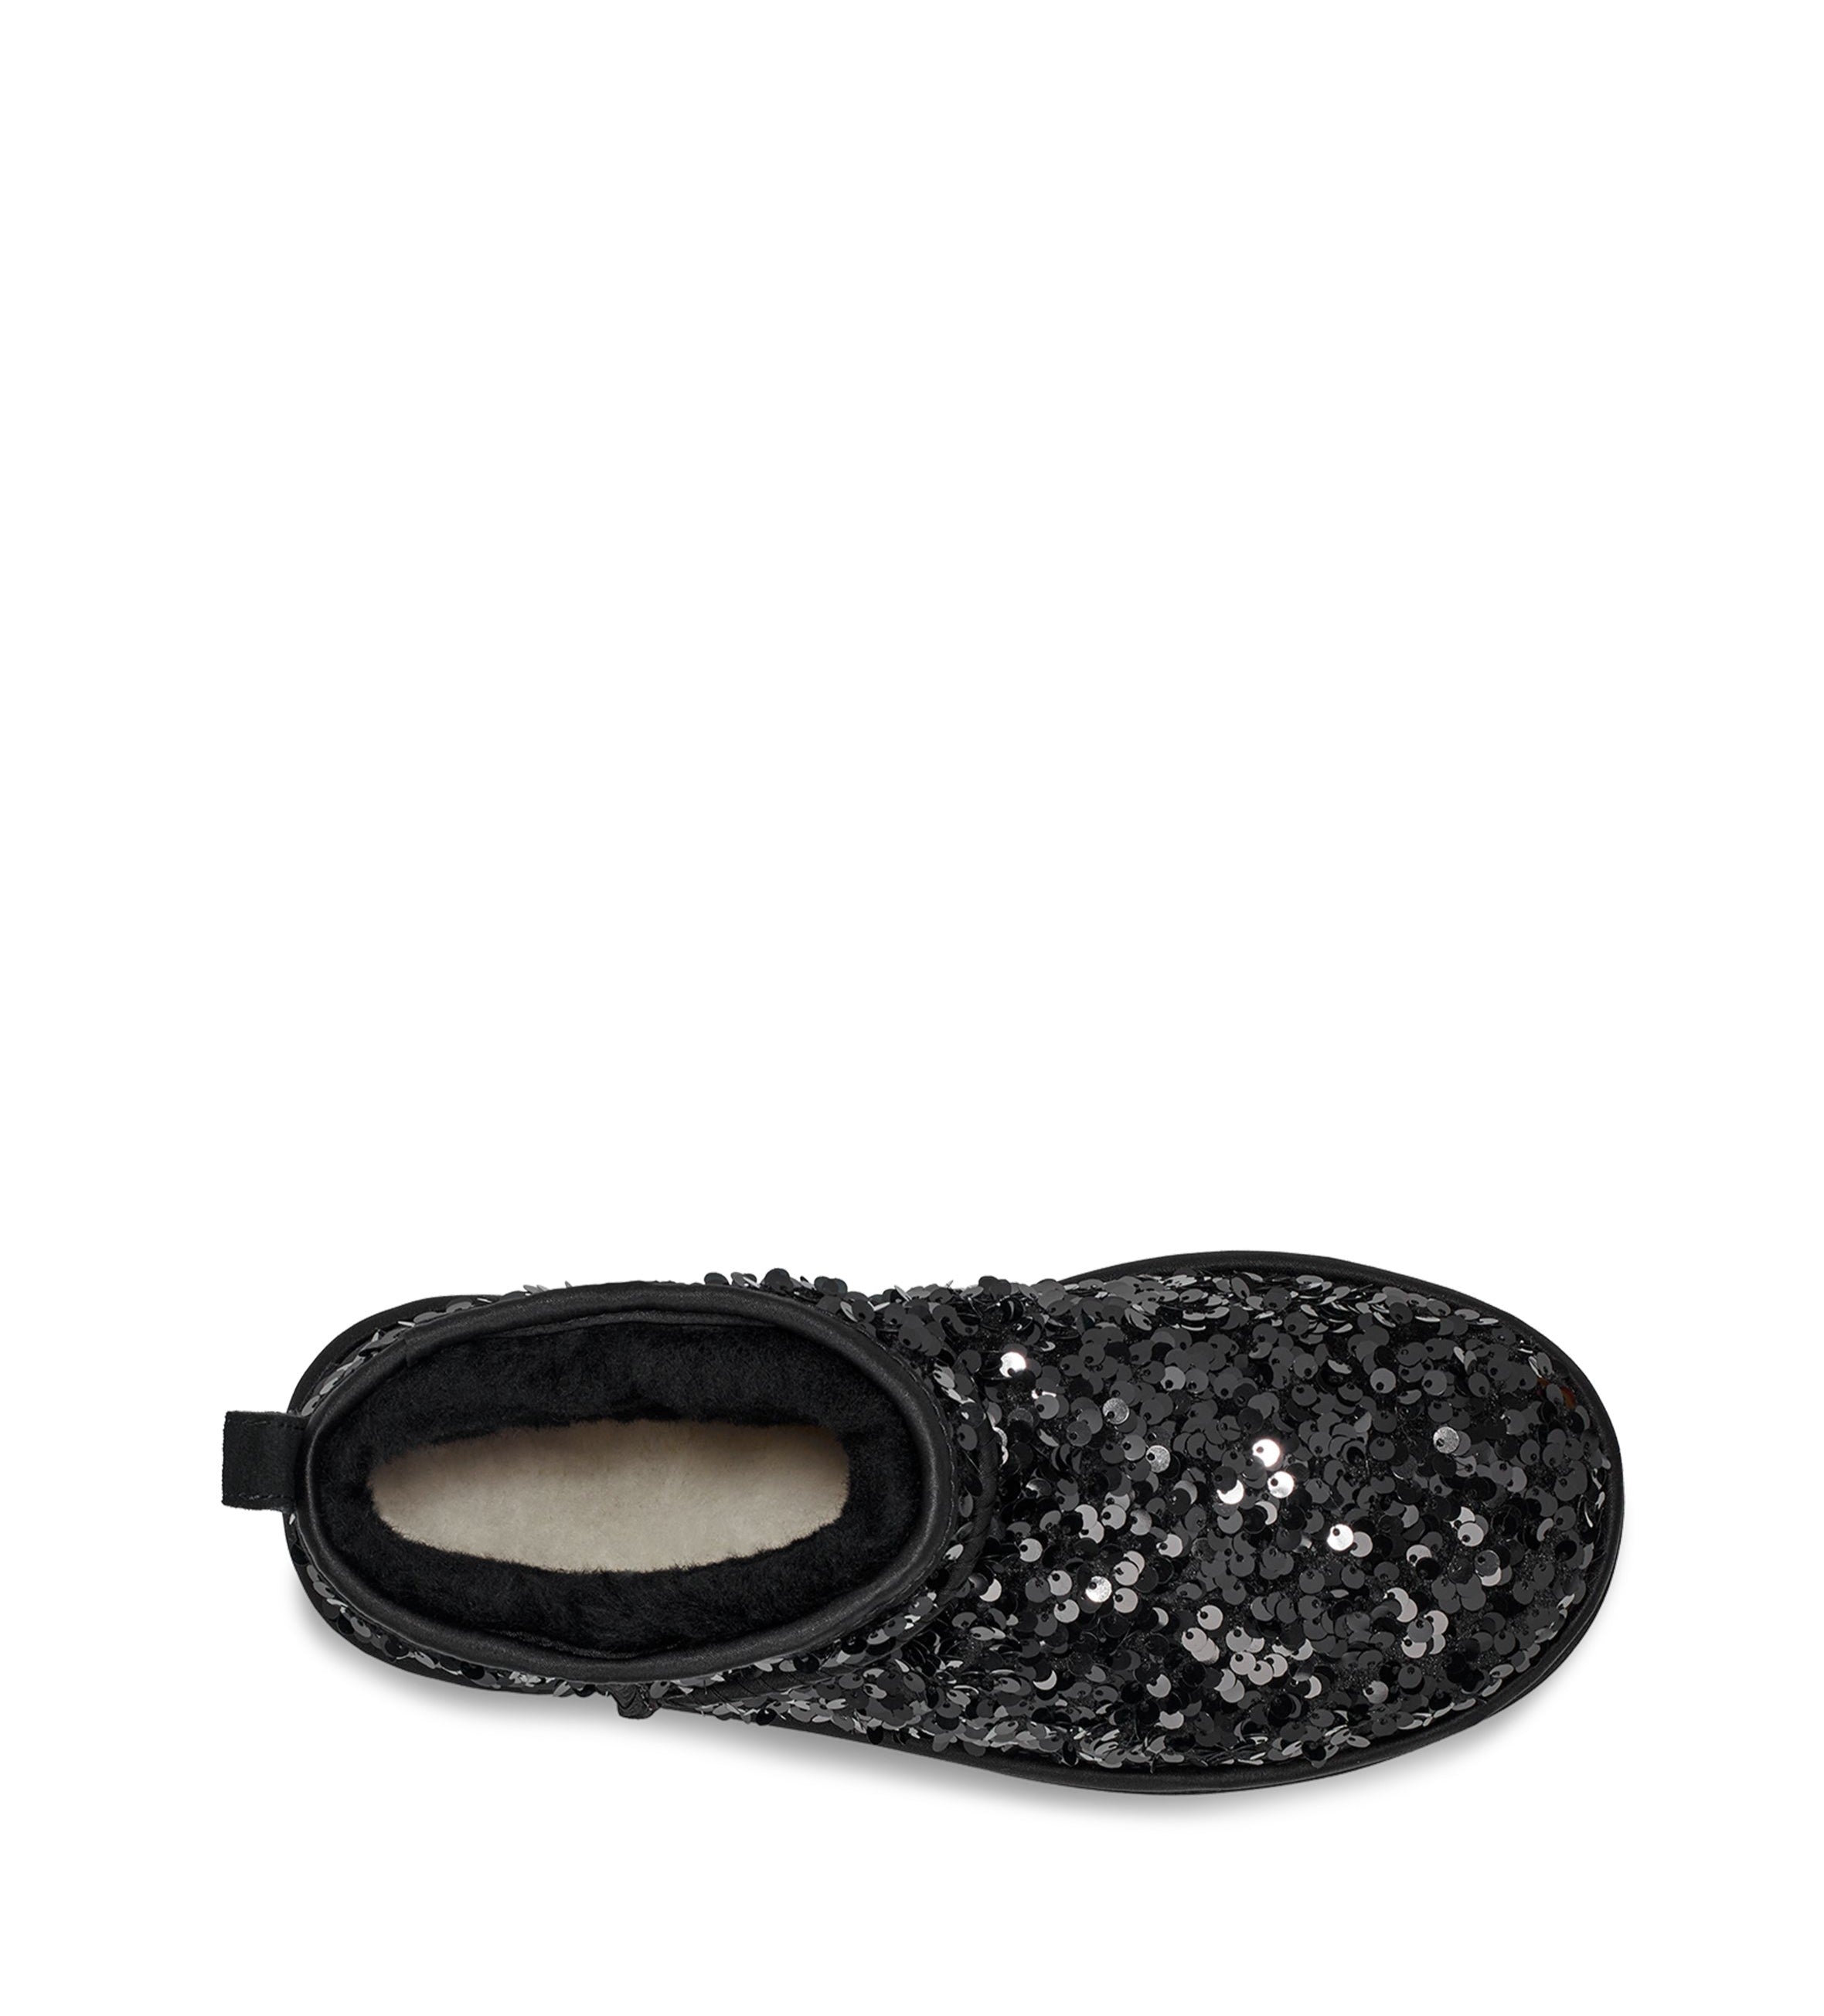 UGG Cluggette Sequin Size 8 - $110 New With Tags - From Awuraposh